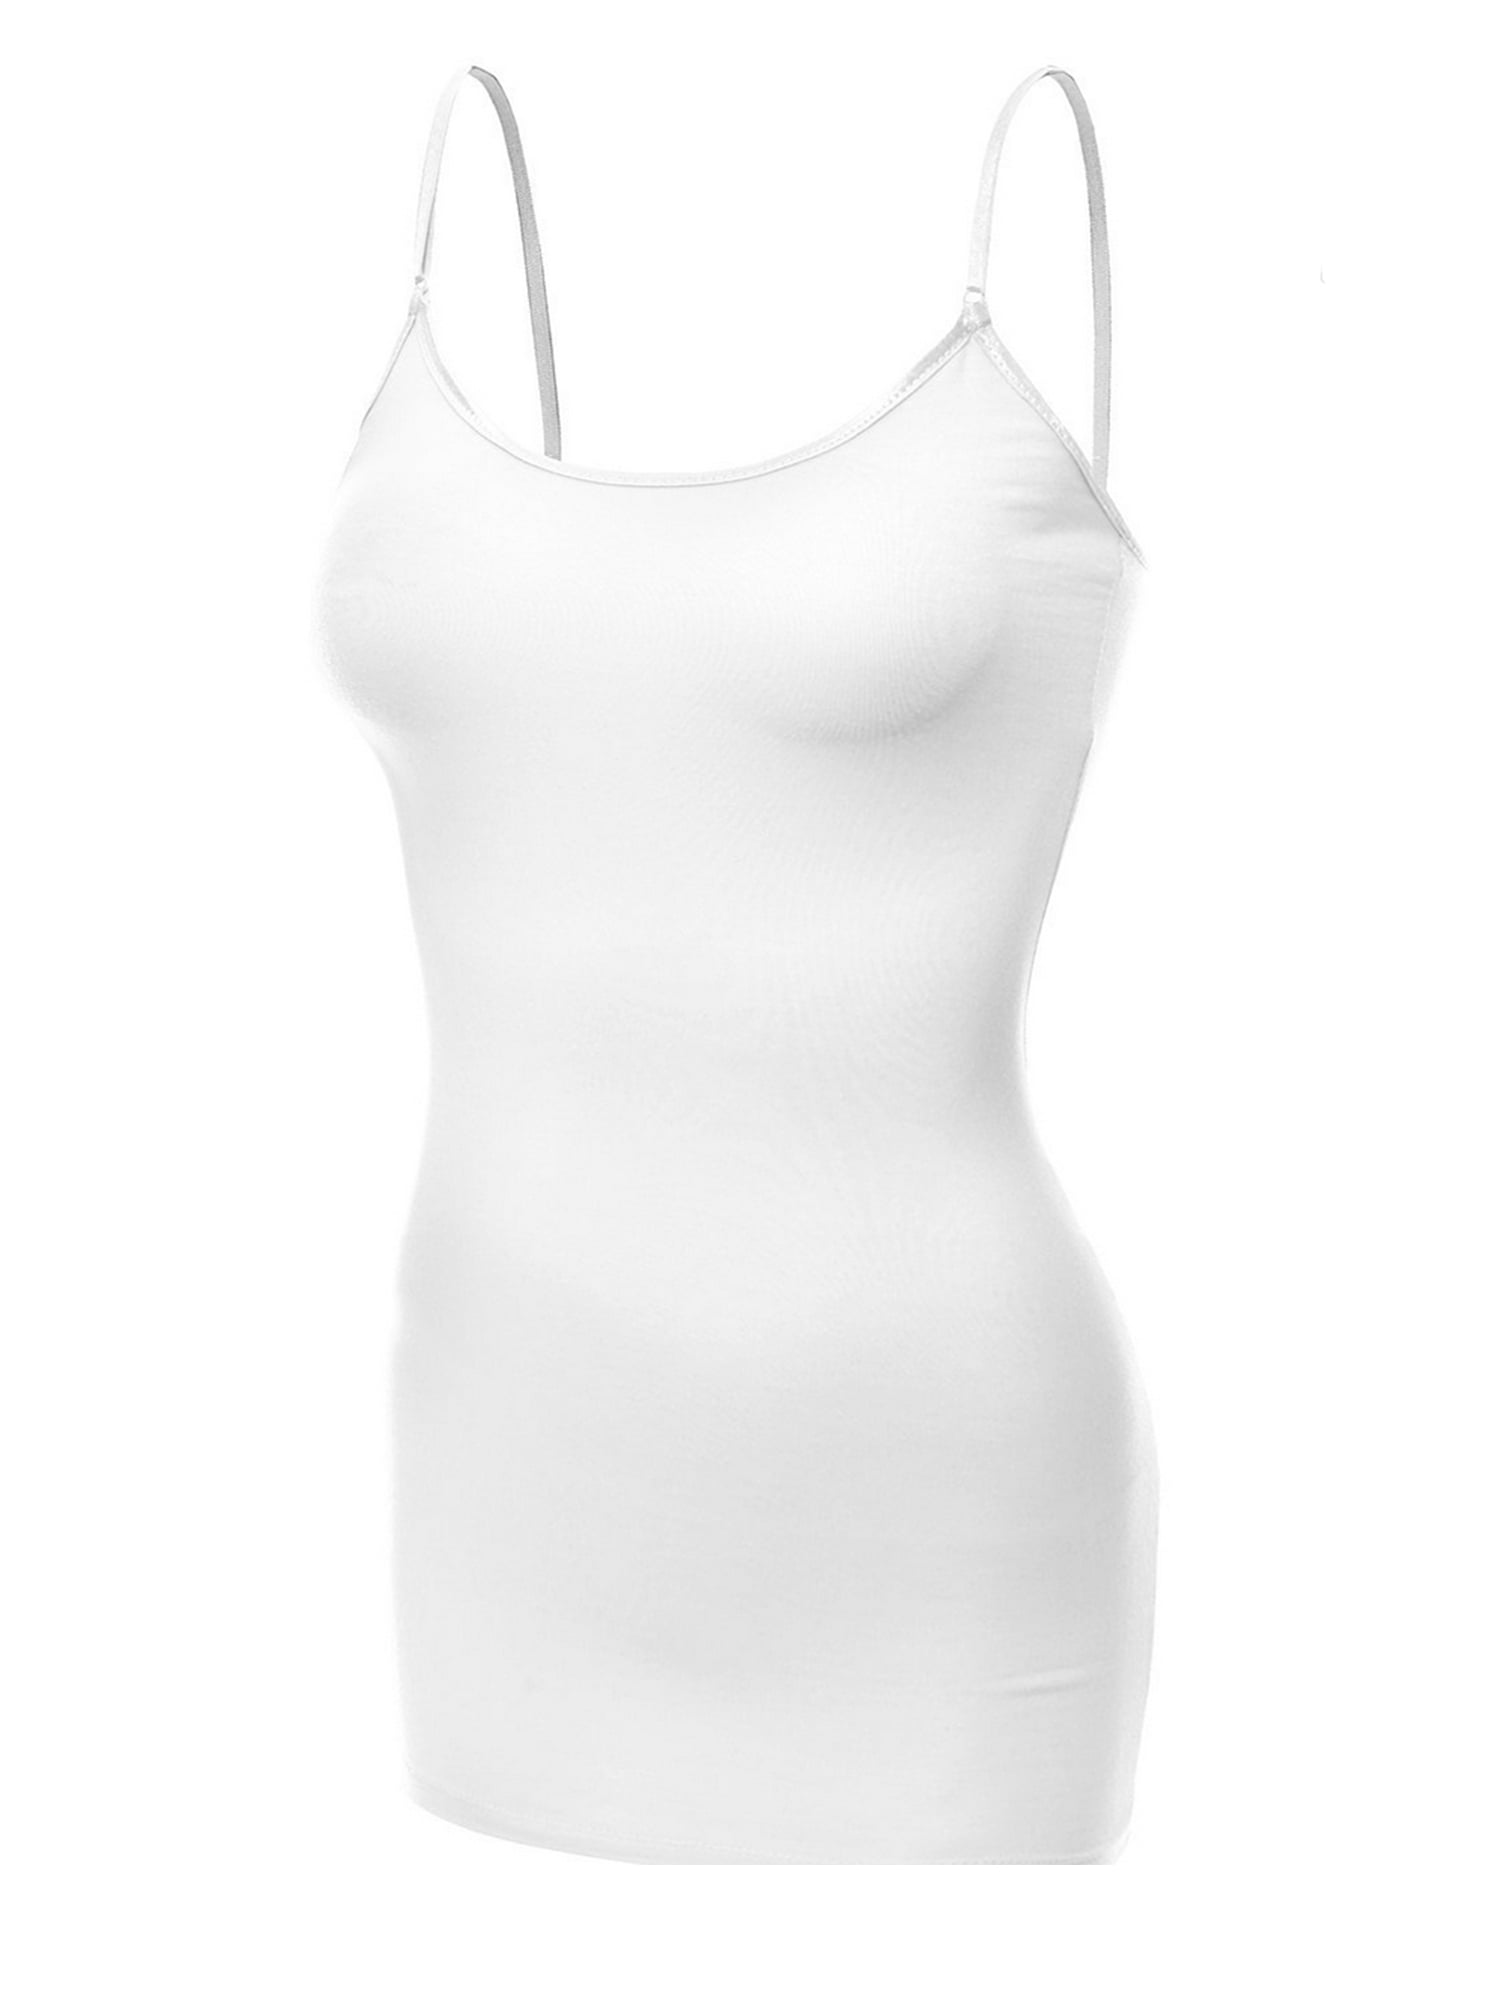 Essential Basic Women's Basic Casual Long Camisole Cami Top Plus Sizes -  White, 2XL